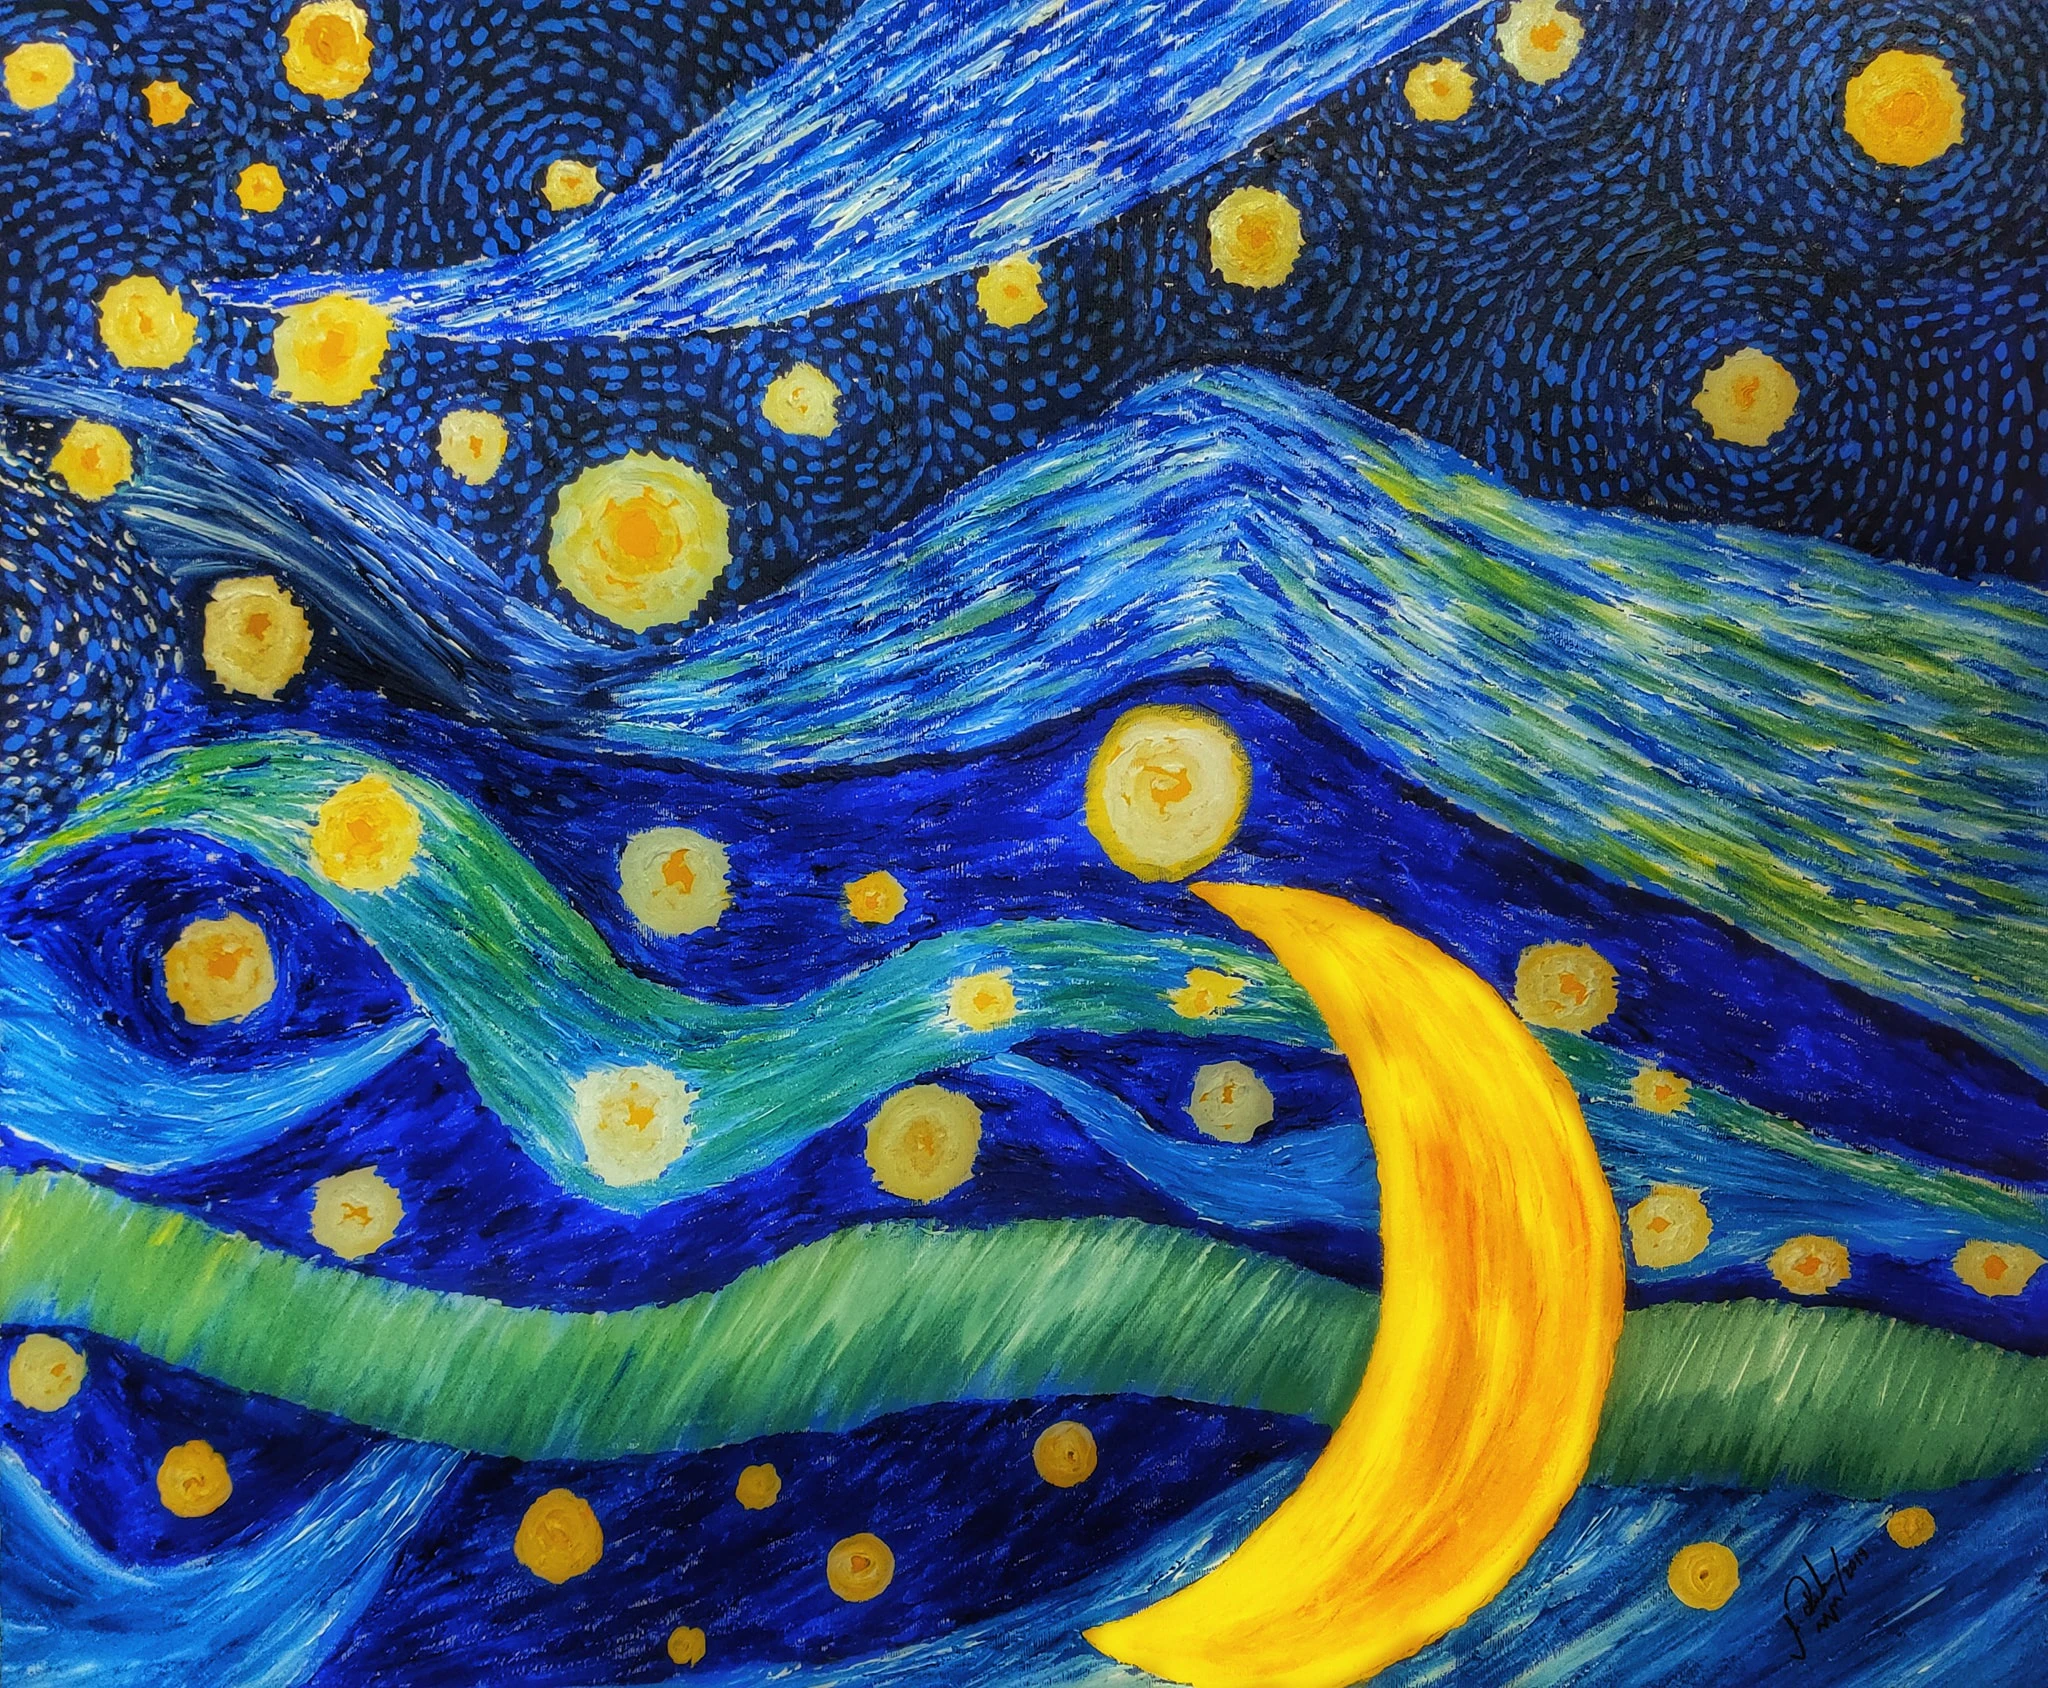 End of the Starry Night